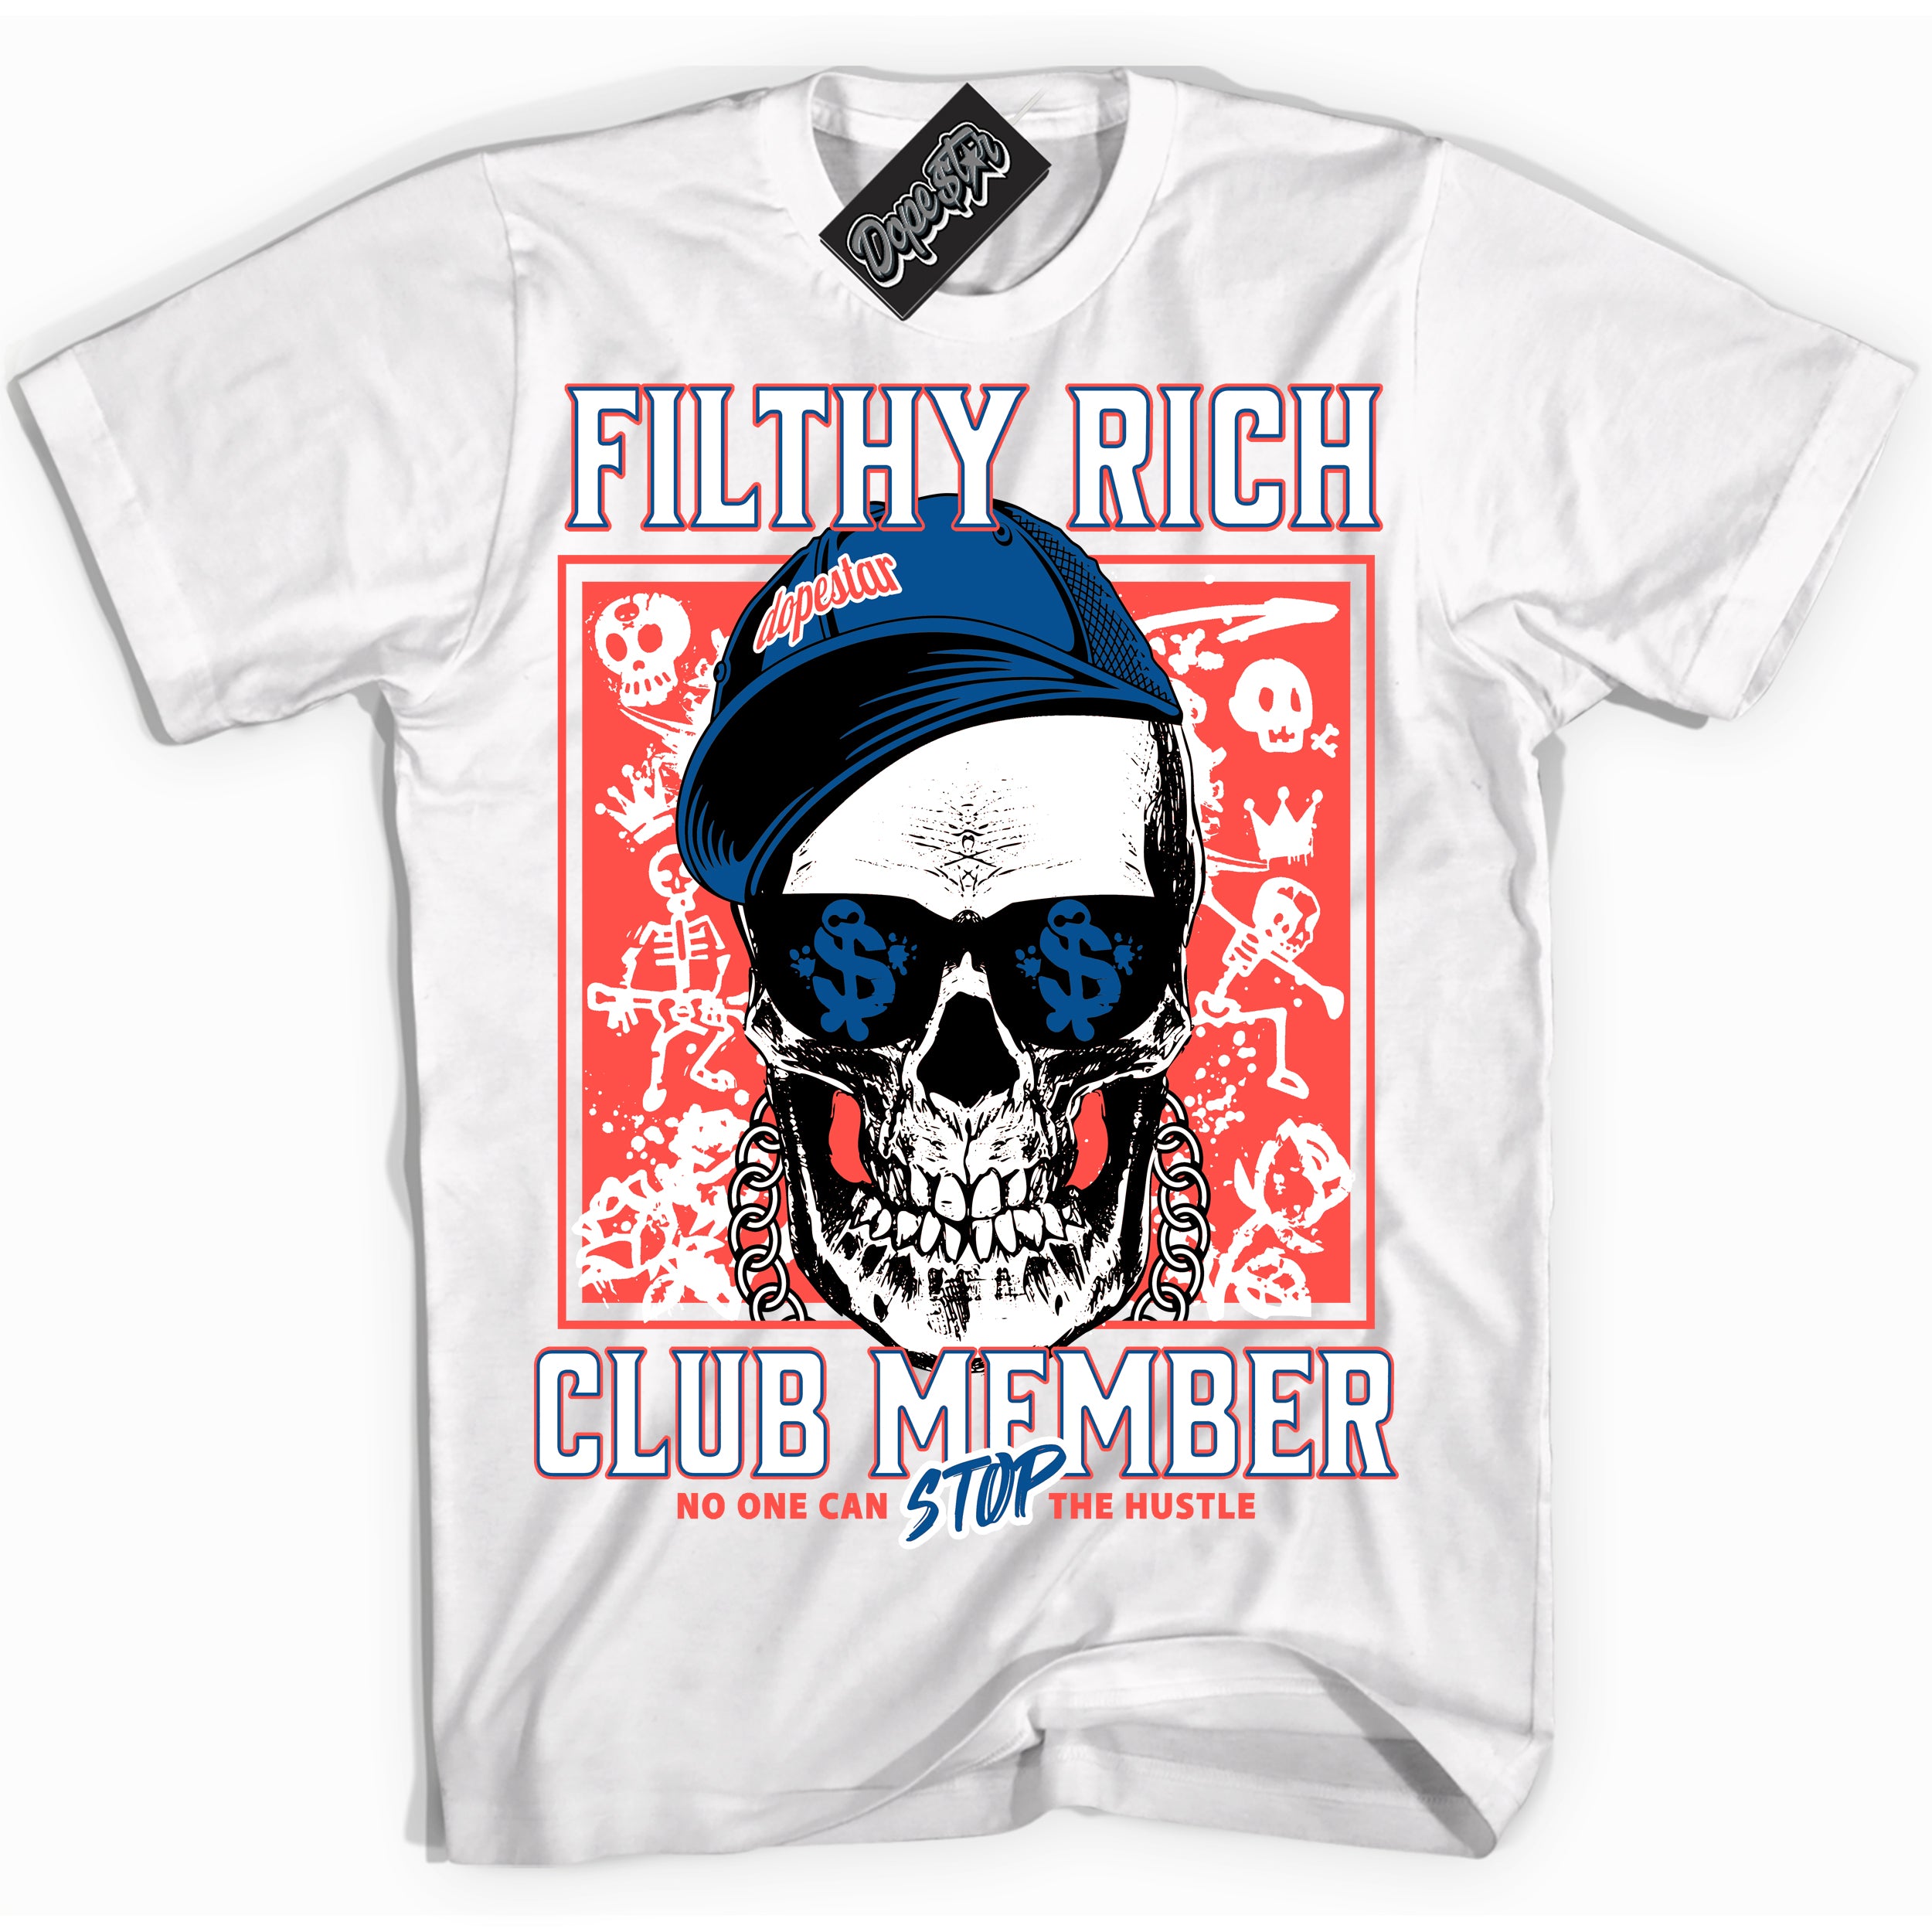 Cool White Shirt with “ Filthy Rich” design that perfectly matches Ultramarine 180s Sneakers.